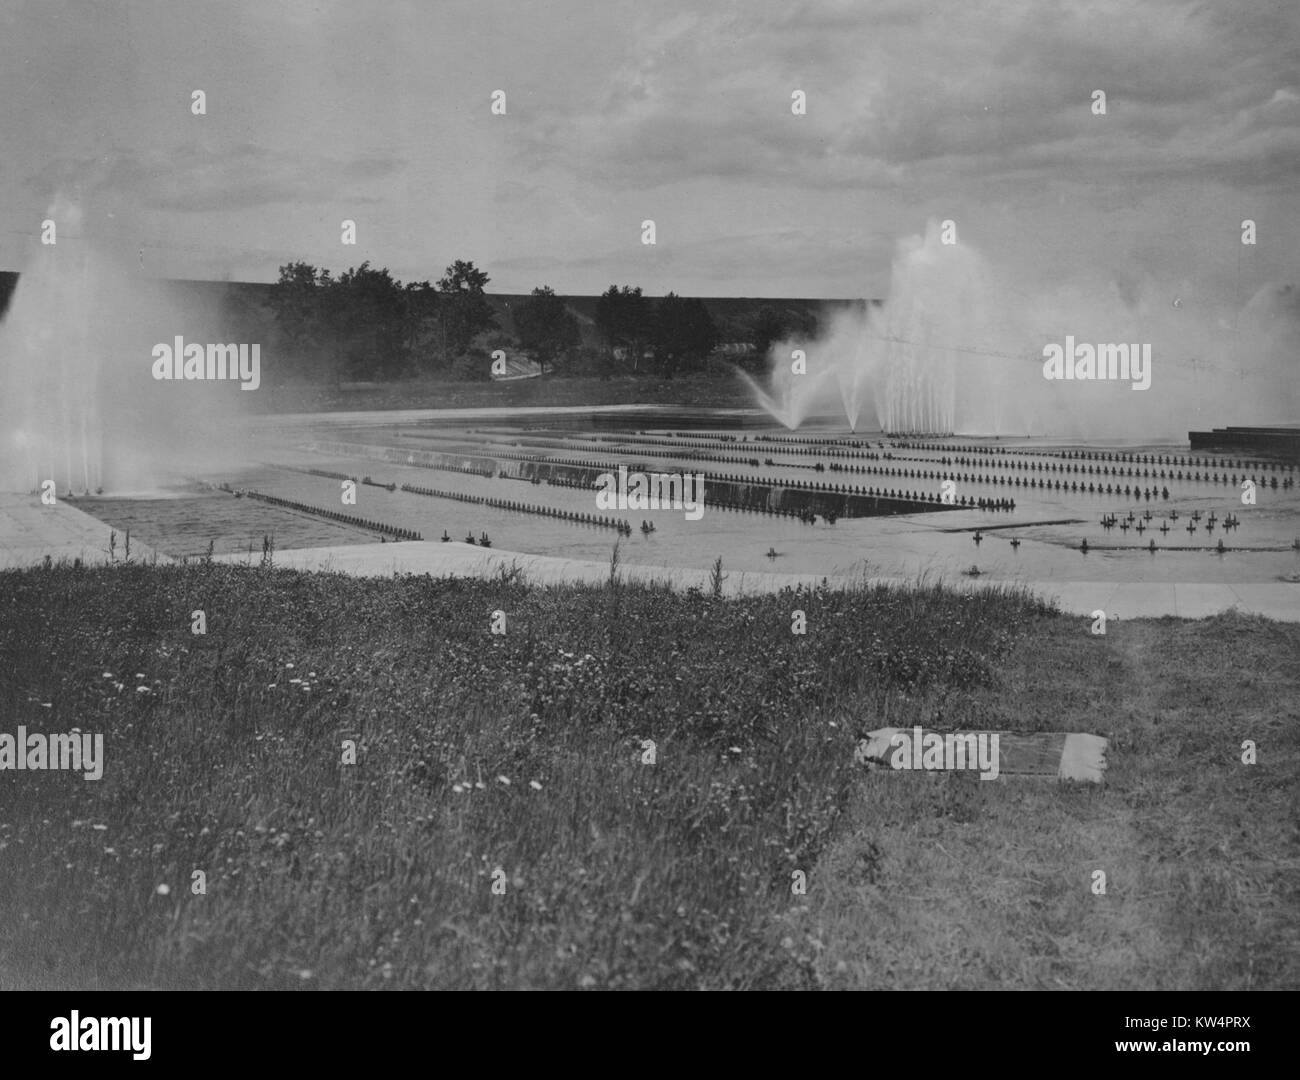 Water is sprayed into the air as the Ashokan reservoir aeration system is in partial operation during construction of the Catskill Aqueduct, New York, United States, June 23, 1916. From the New York Public Library. Stock Photo